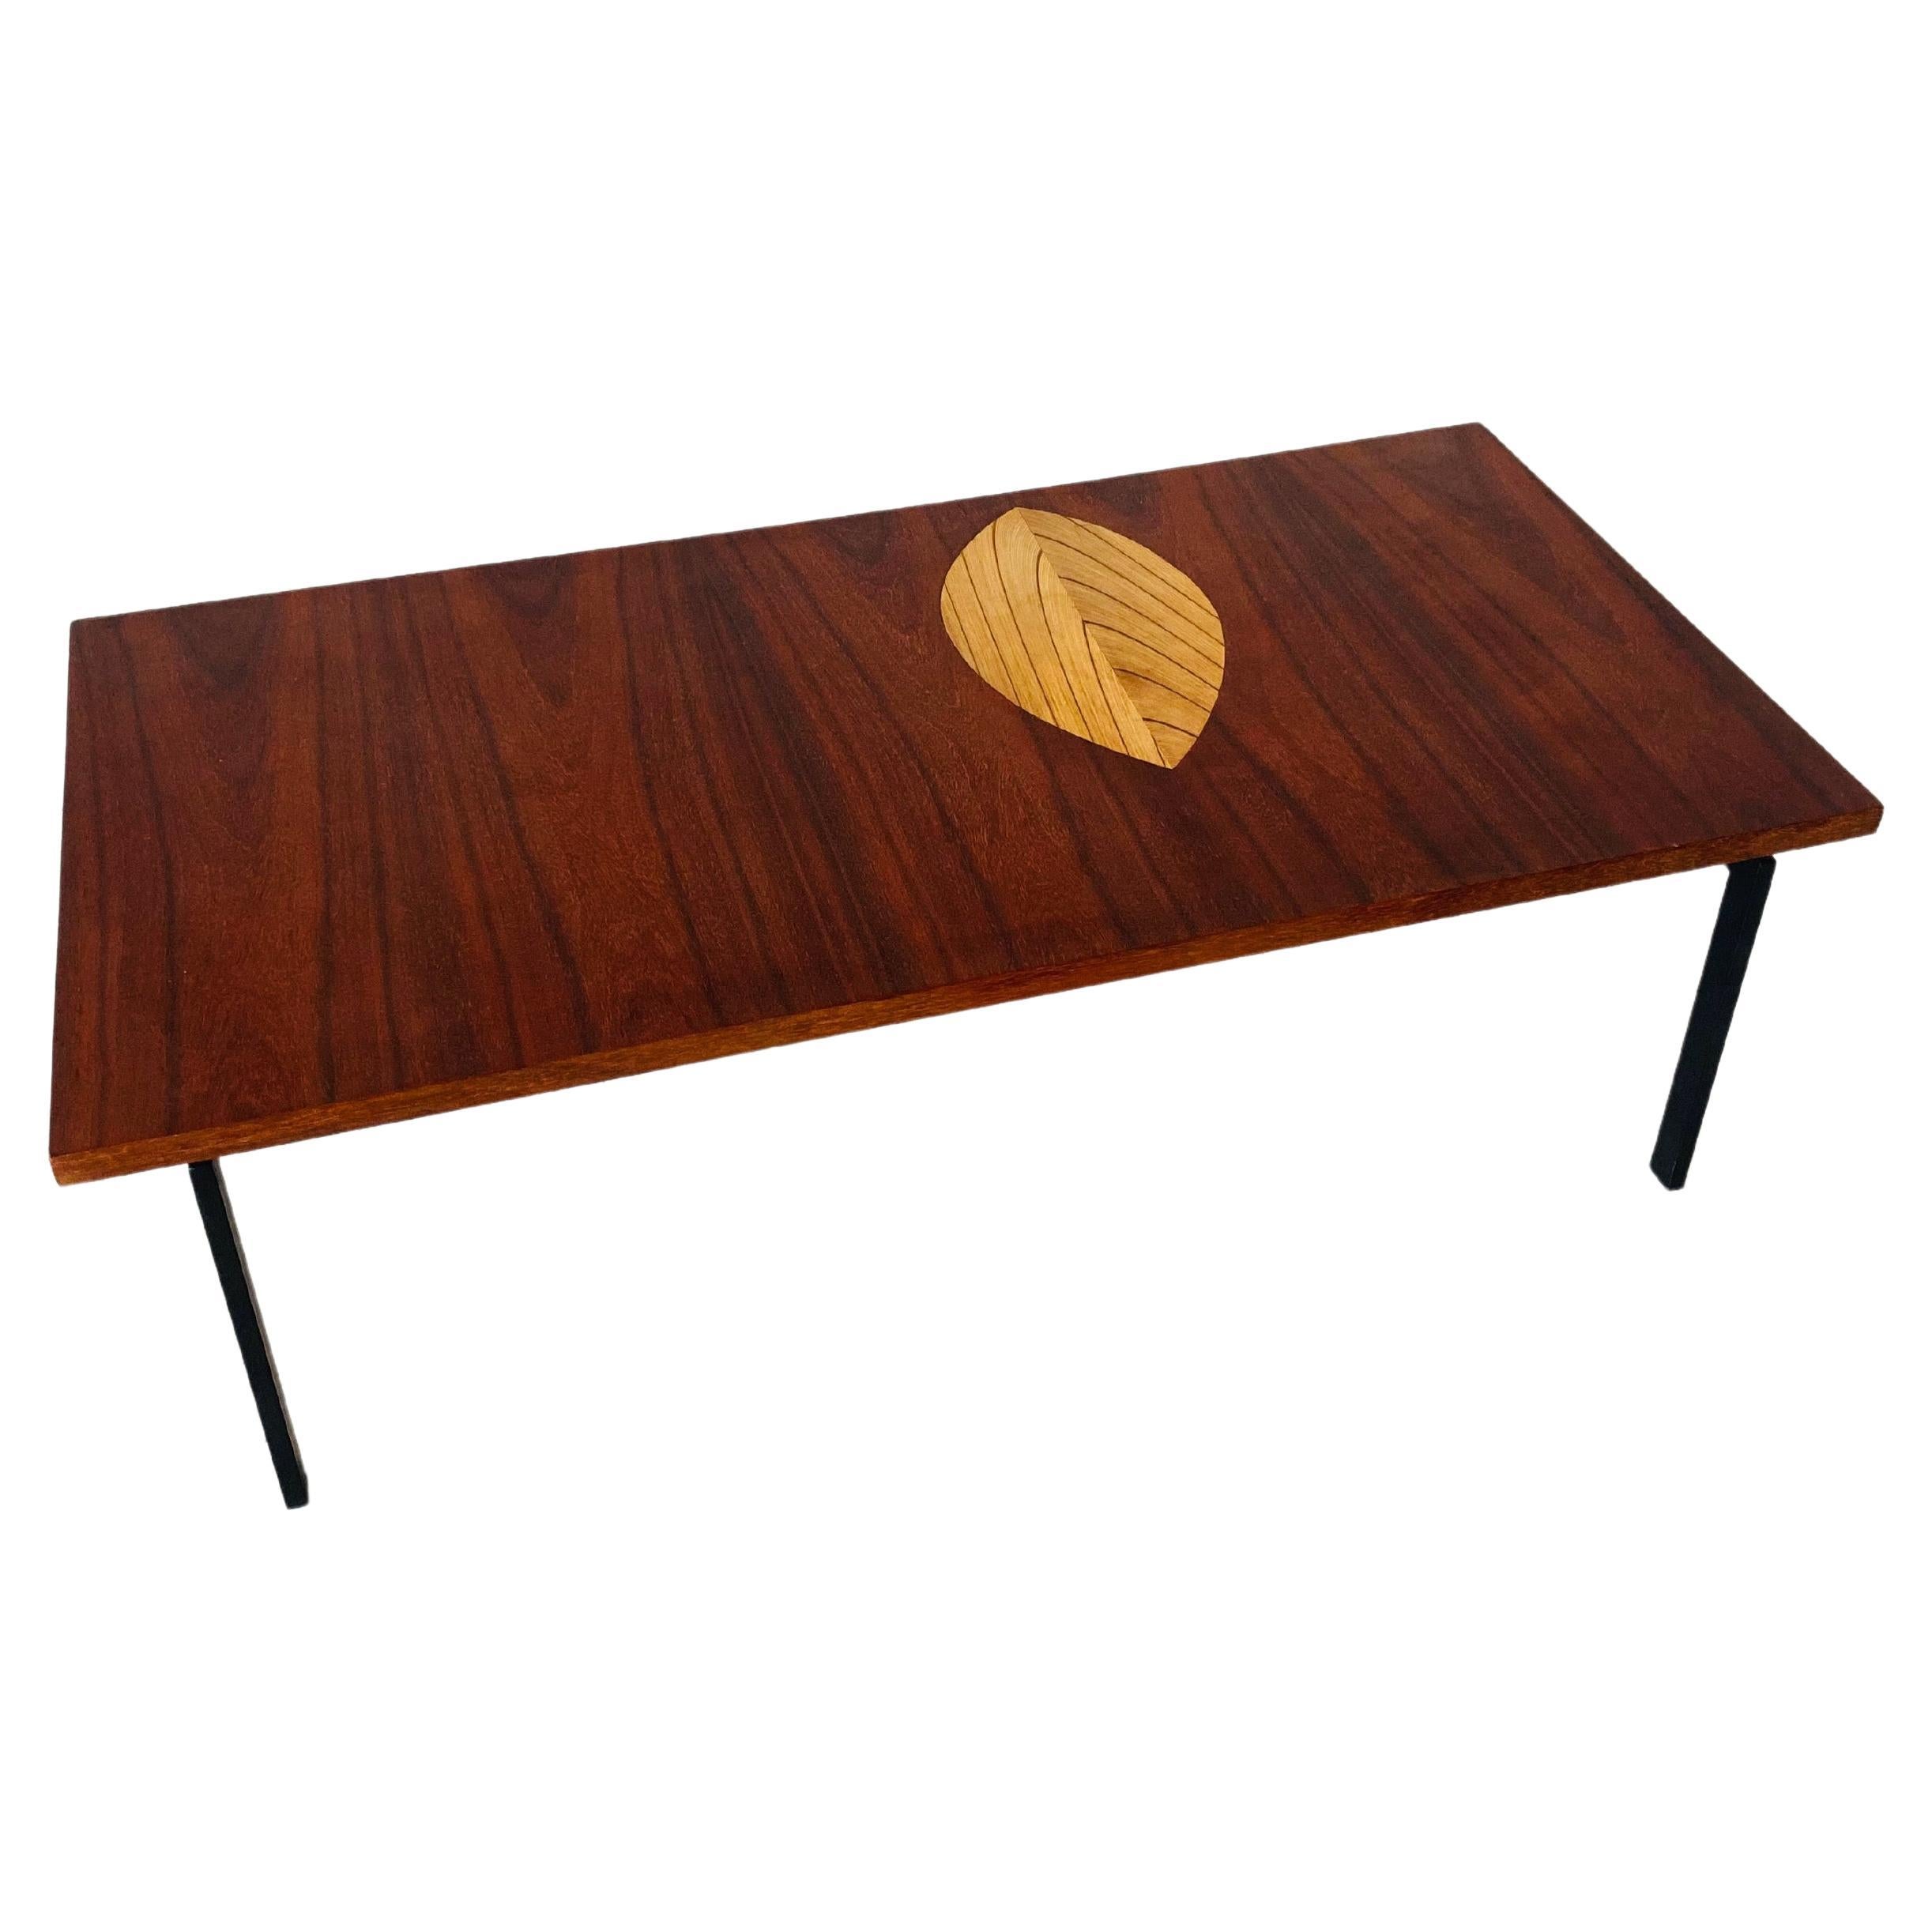 Table with Inlaid Leaf in Birch by Tapio Wirkkala For Sale